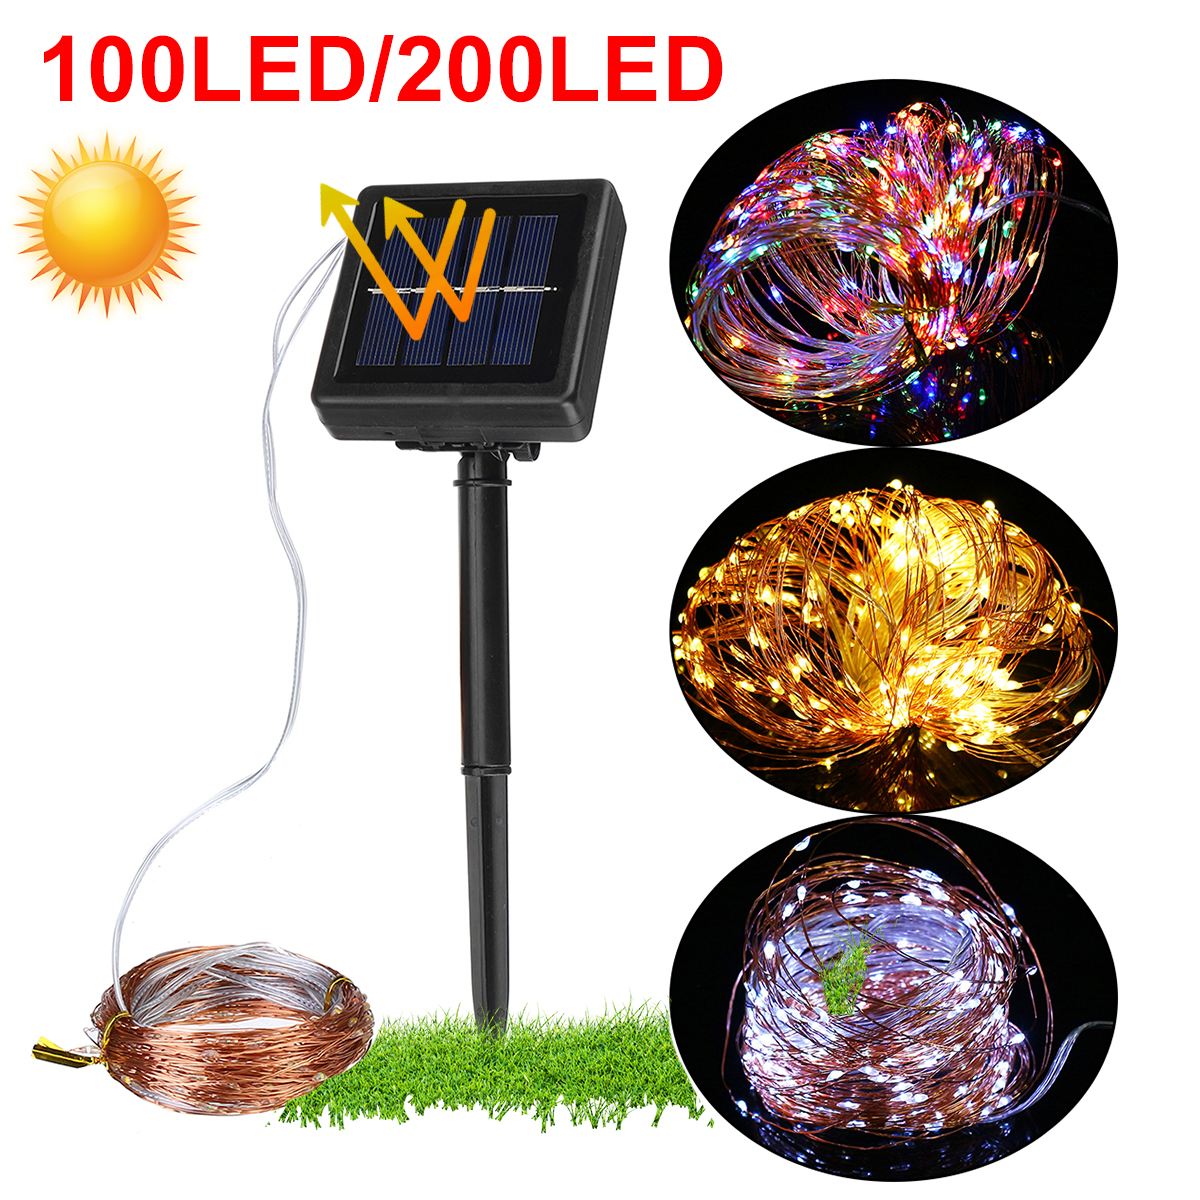 12M-22M-LED-Solar-Power-String-Light-8-Modes-Copper-Wire-Fairy-Outdoor-Garden-Waterproof-Holiday-Dec-1713762-1